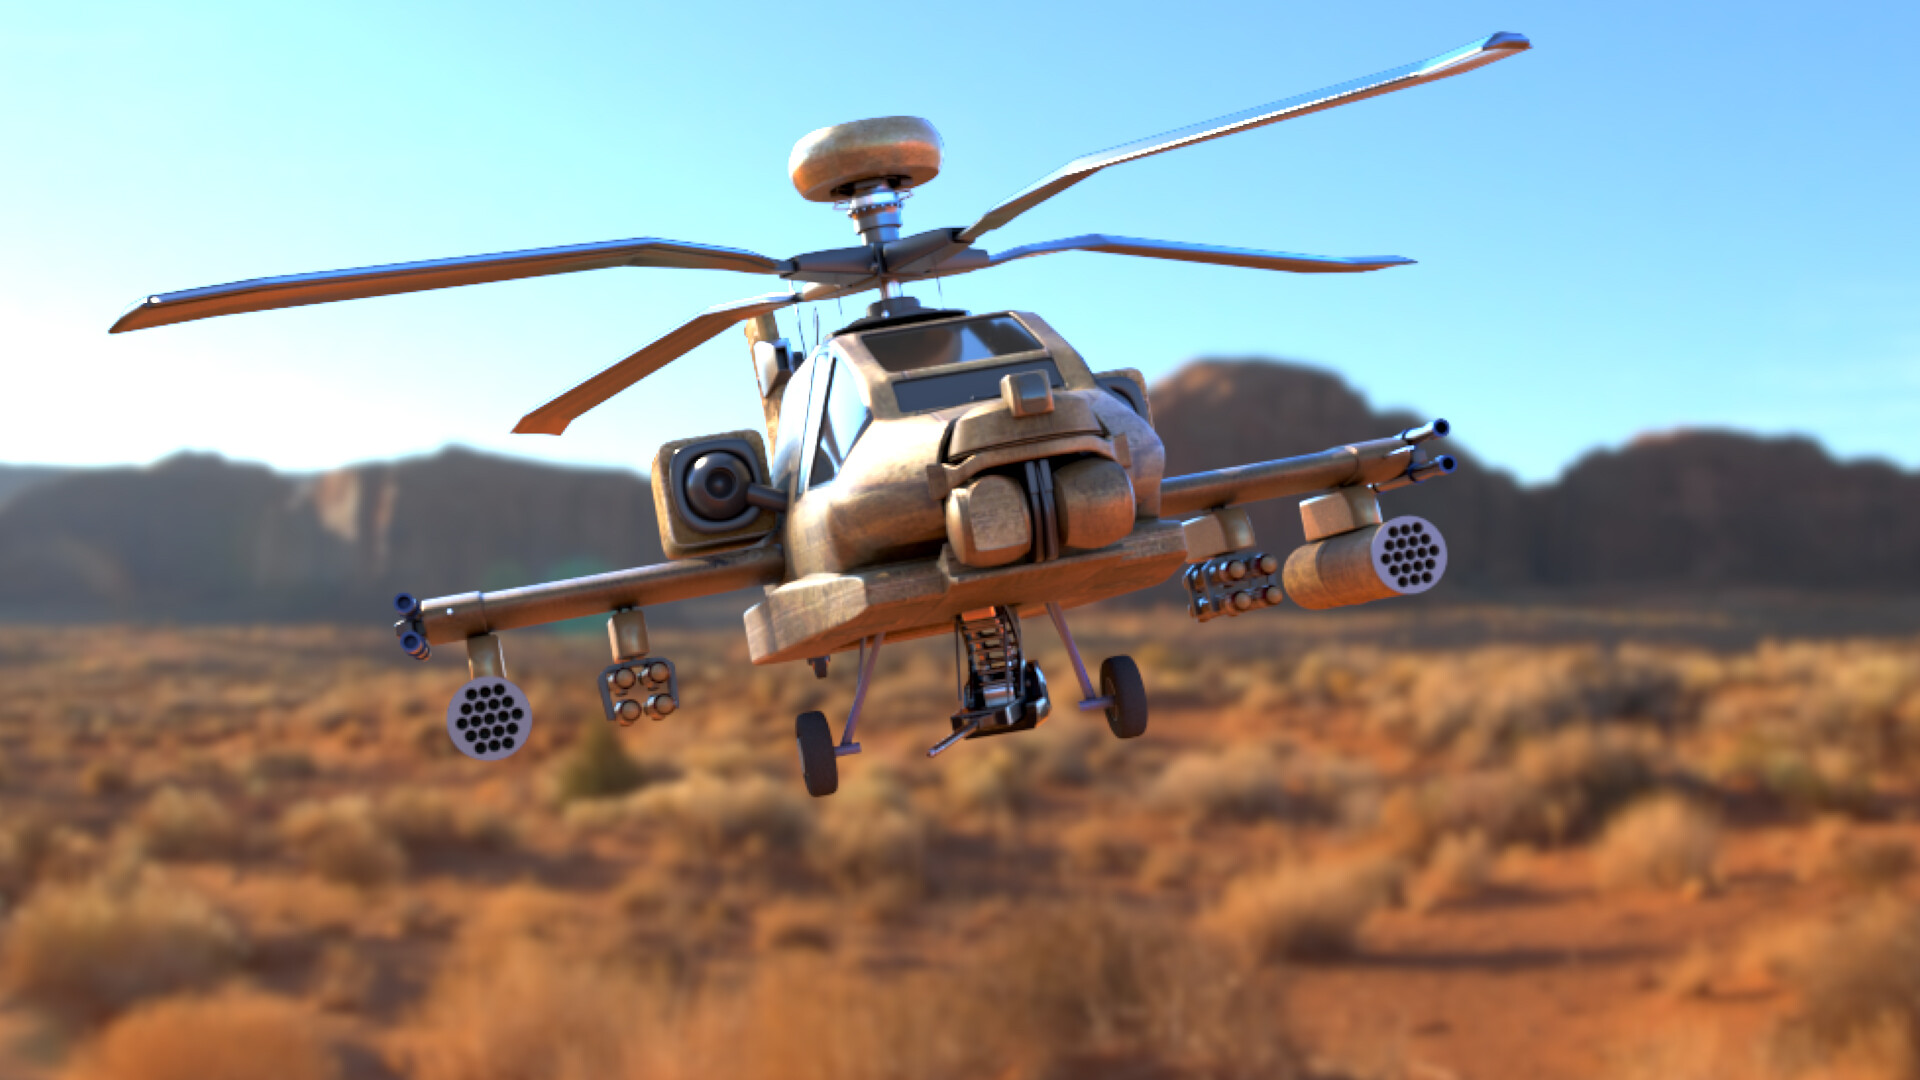 ArtStation - Helicopter Boeing AH-64 Apache